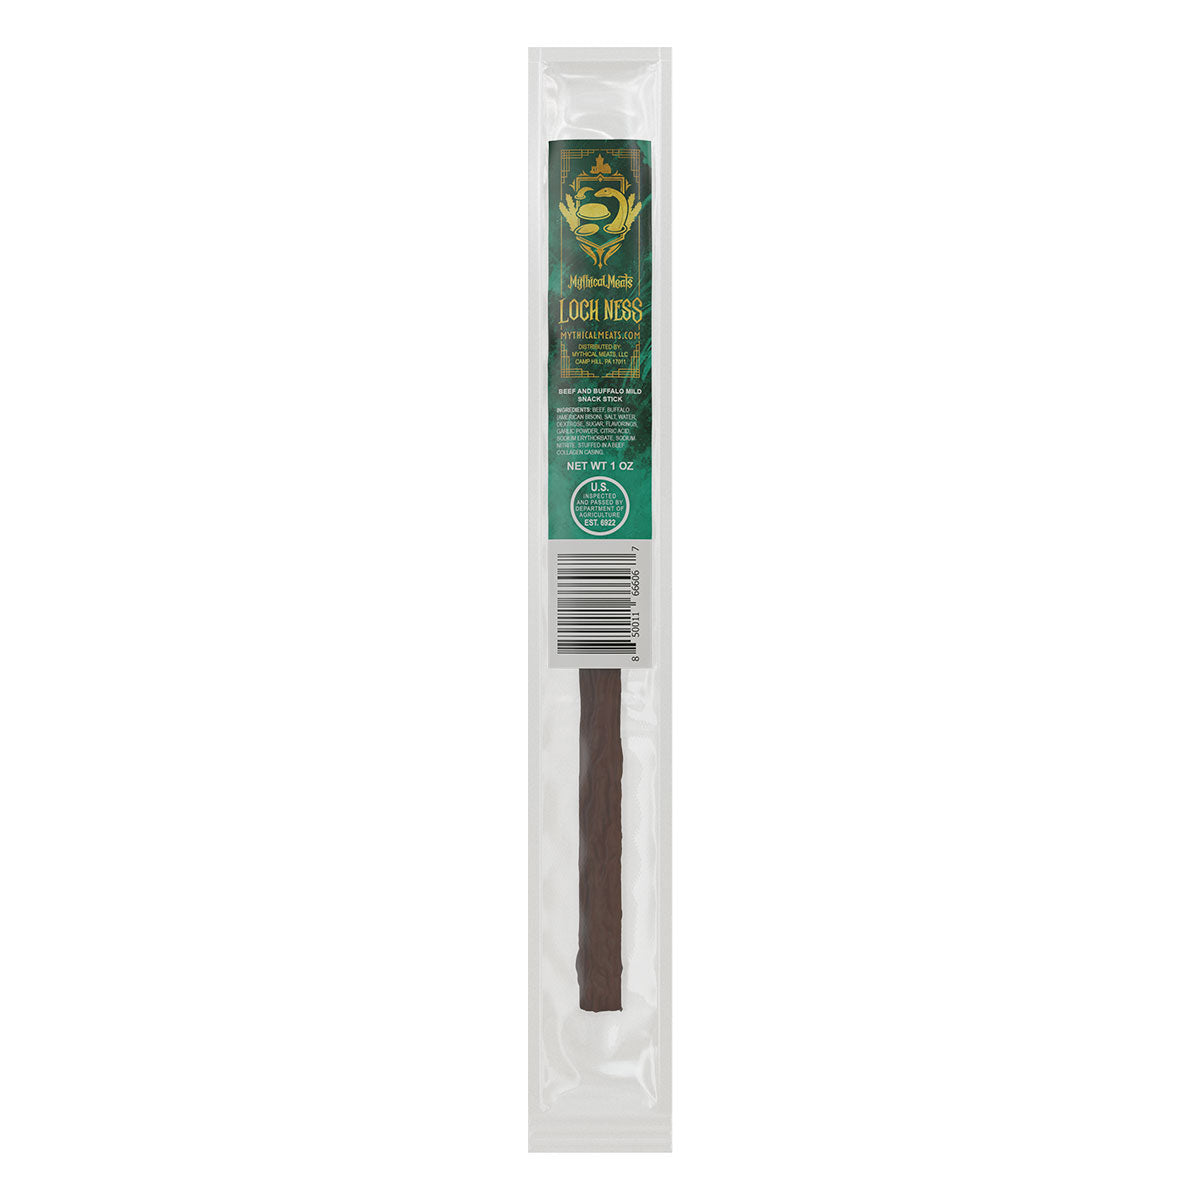 Loch Ness Monster (Beef and Buffalo Mild Snack Stick)